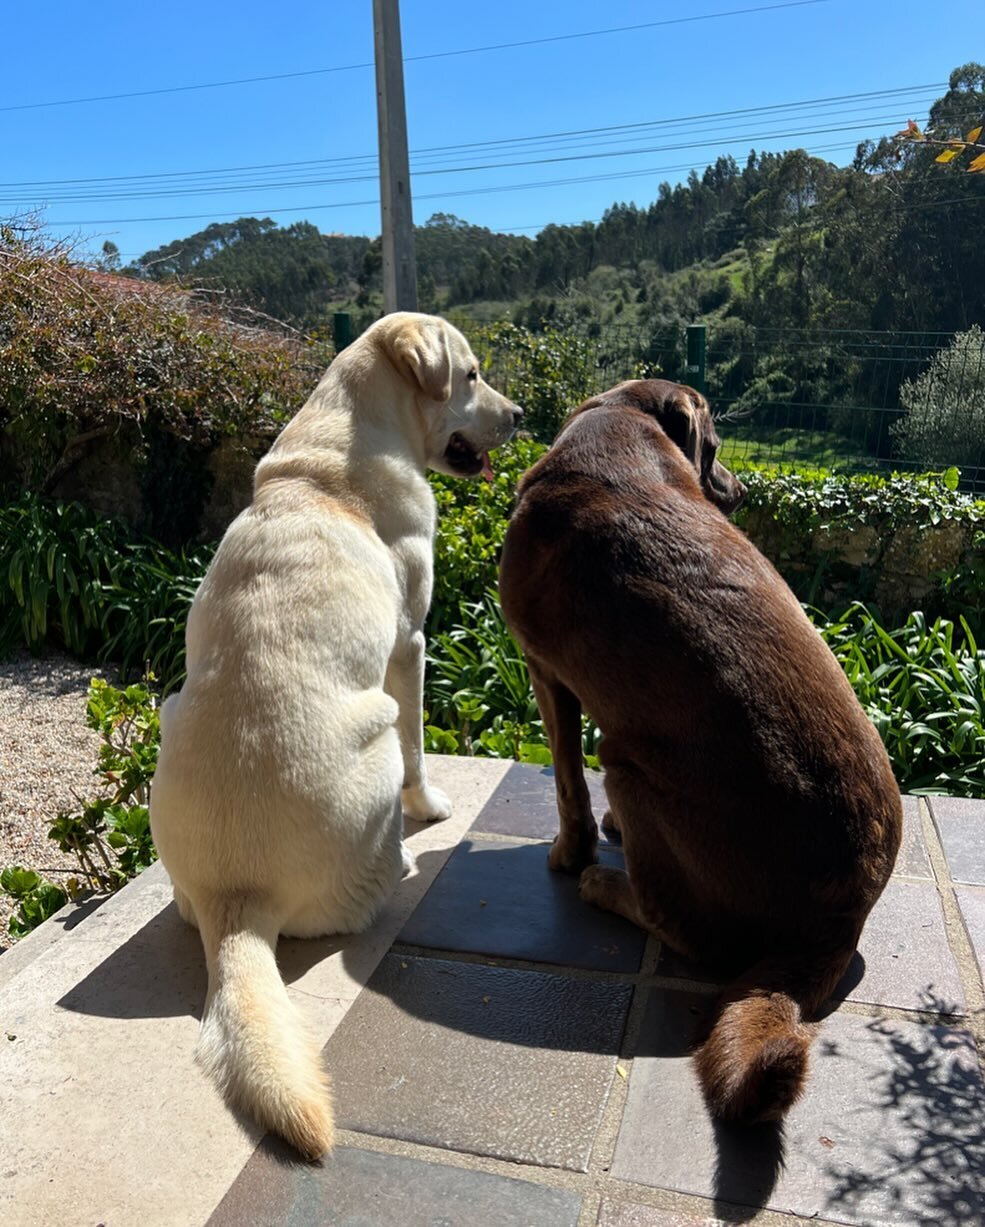 Meet the two Labs of Quinta de Santo Ant&oacute;nio! 

This is the home of Don&rsquo;s good friend G&ouml;ran and wife Meg, who&rsquo;ve lived here for five years with their two Labradors. Don and G&ouml;ran met in 1984, sailing a staysail schooner f